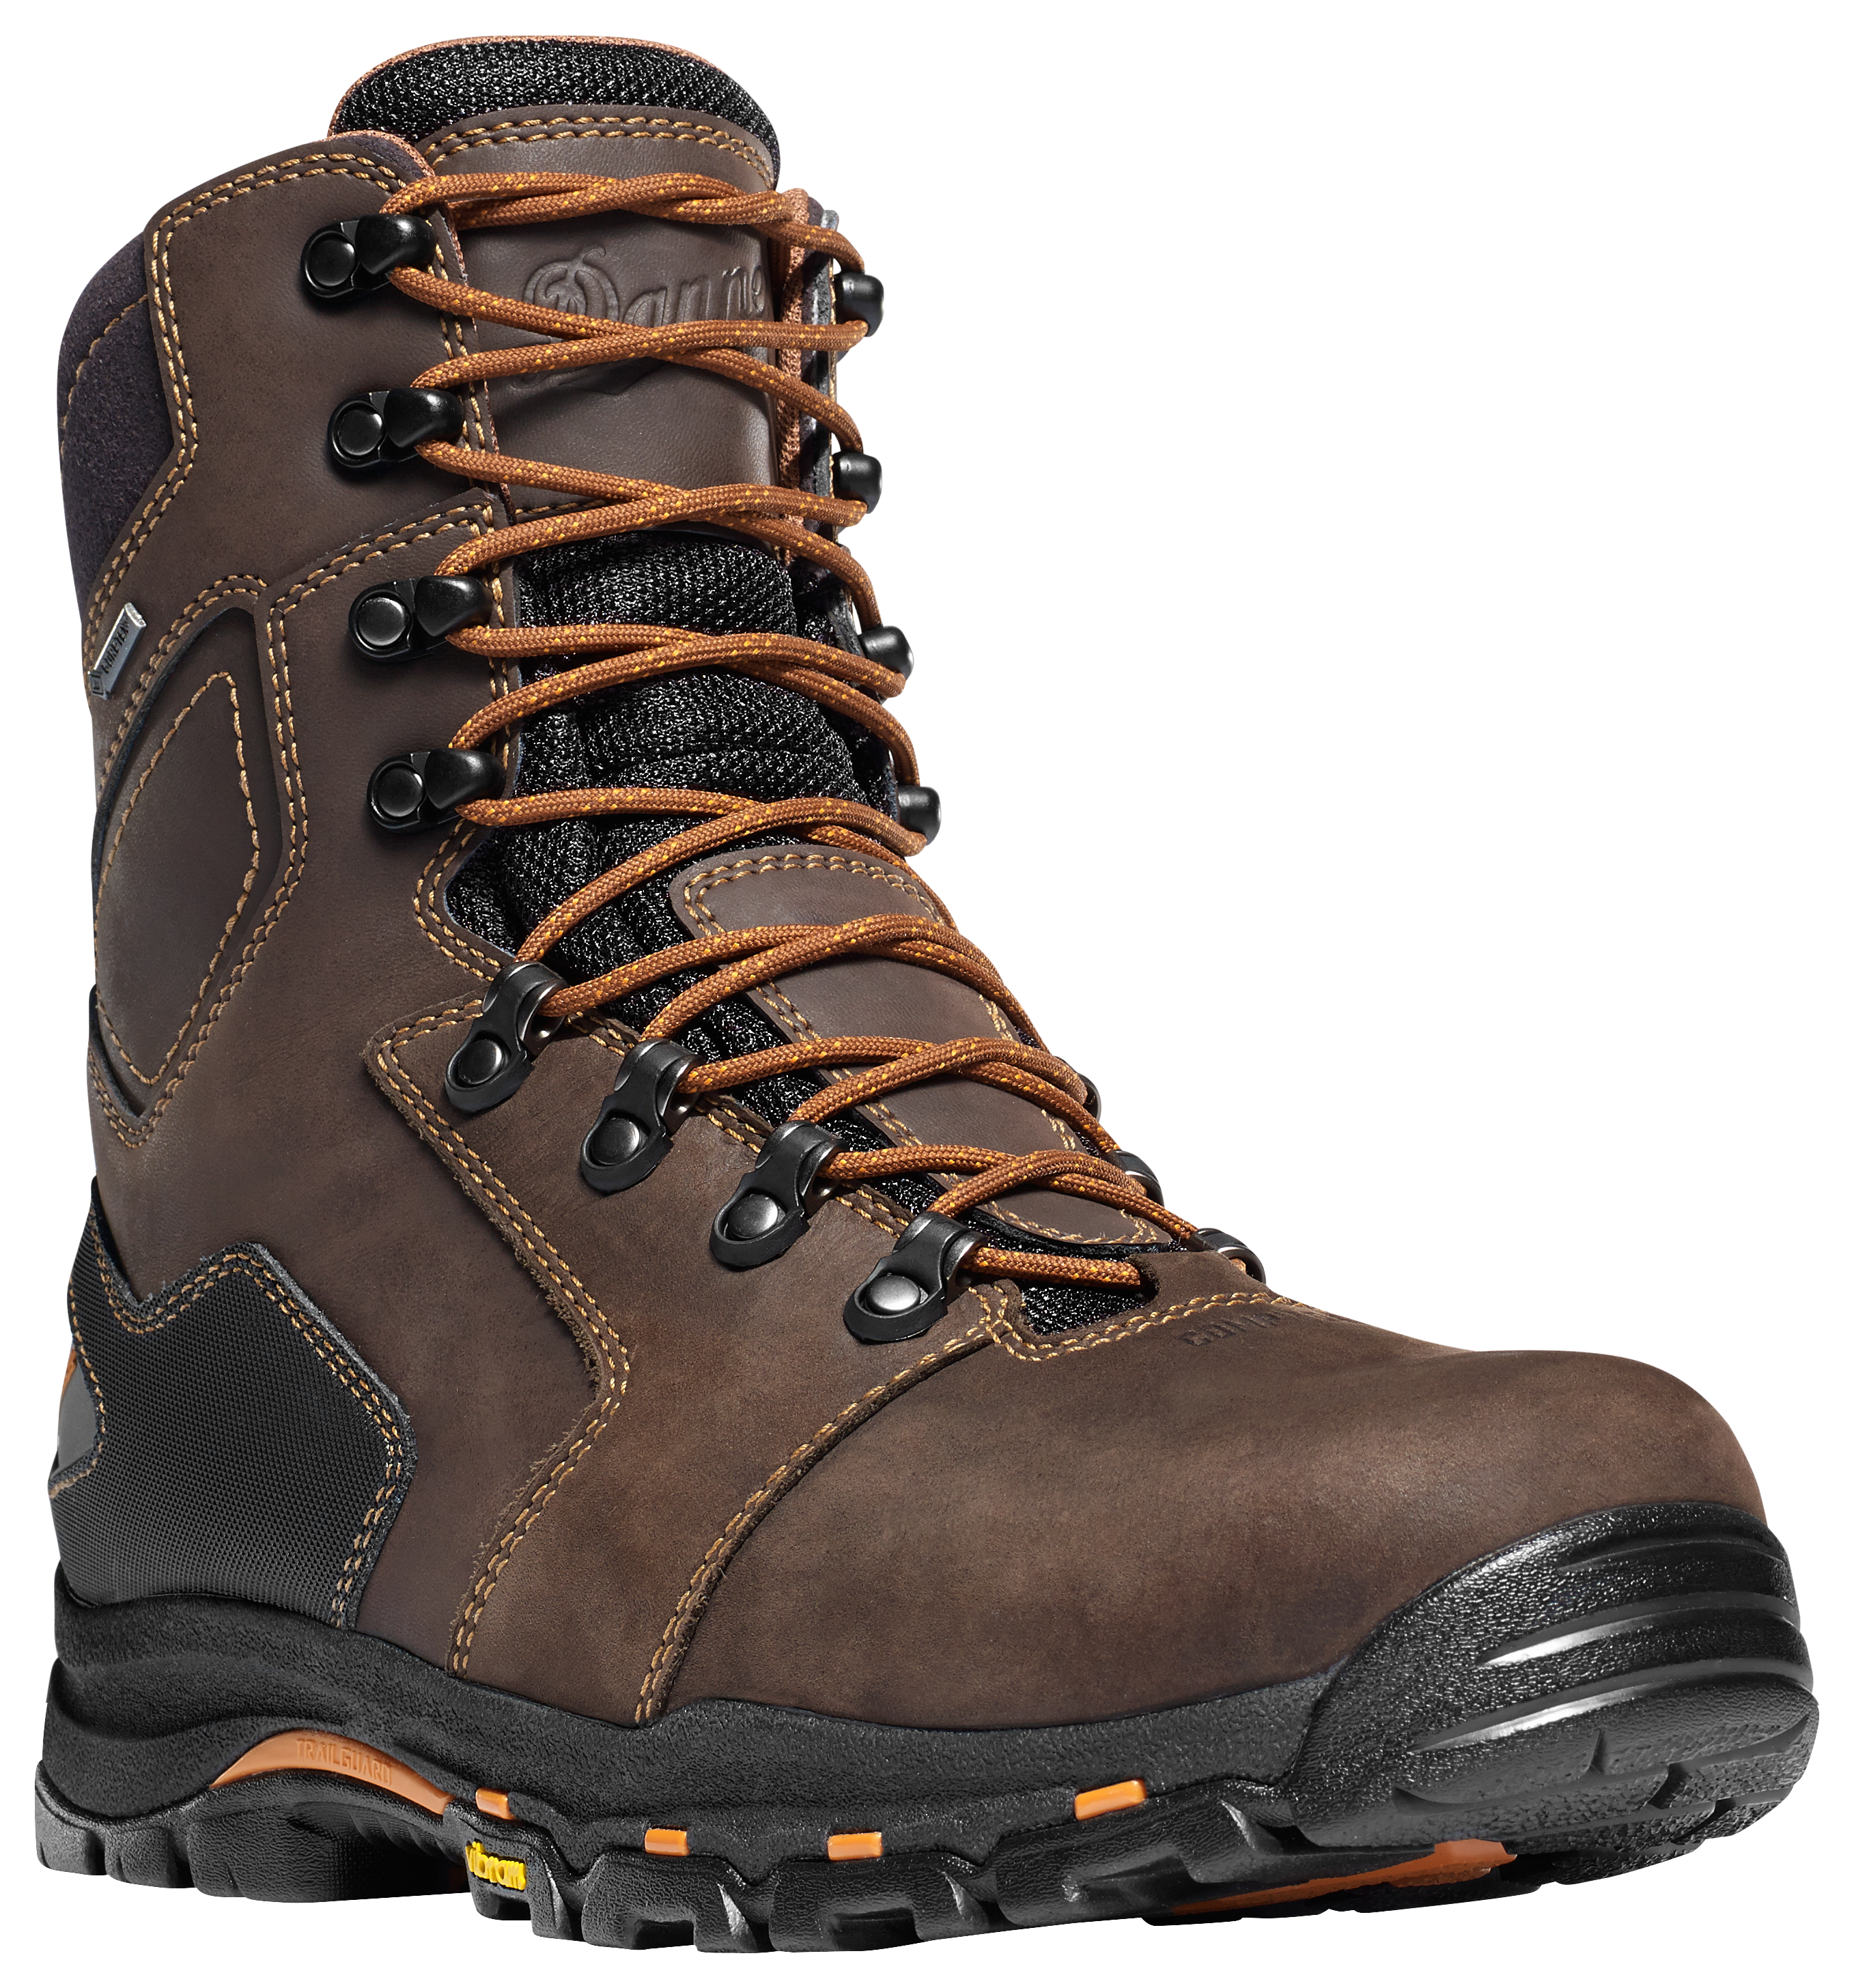 Danner Vicious GORE-TEX Composite Toe Work Boots for Men - Brown - 10.5W